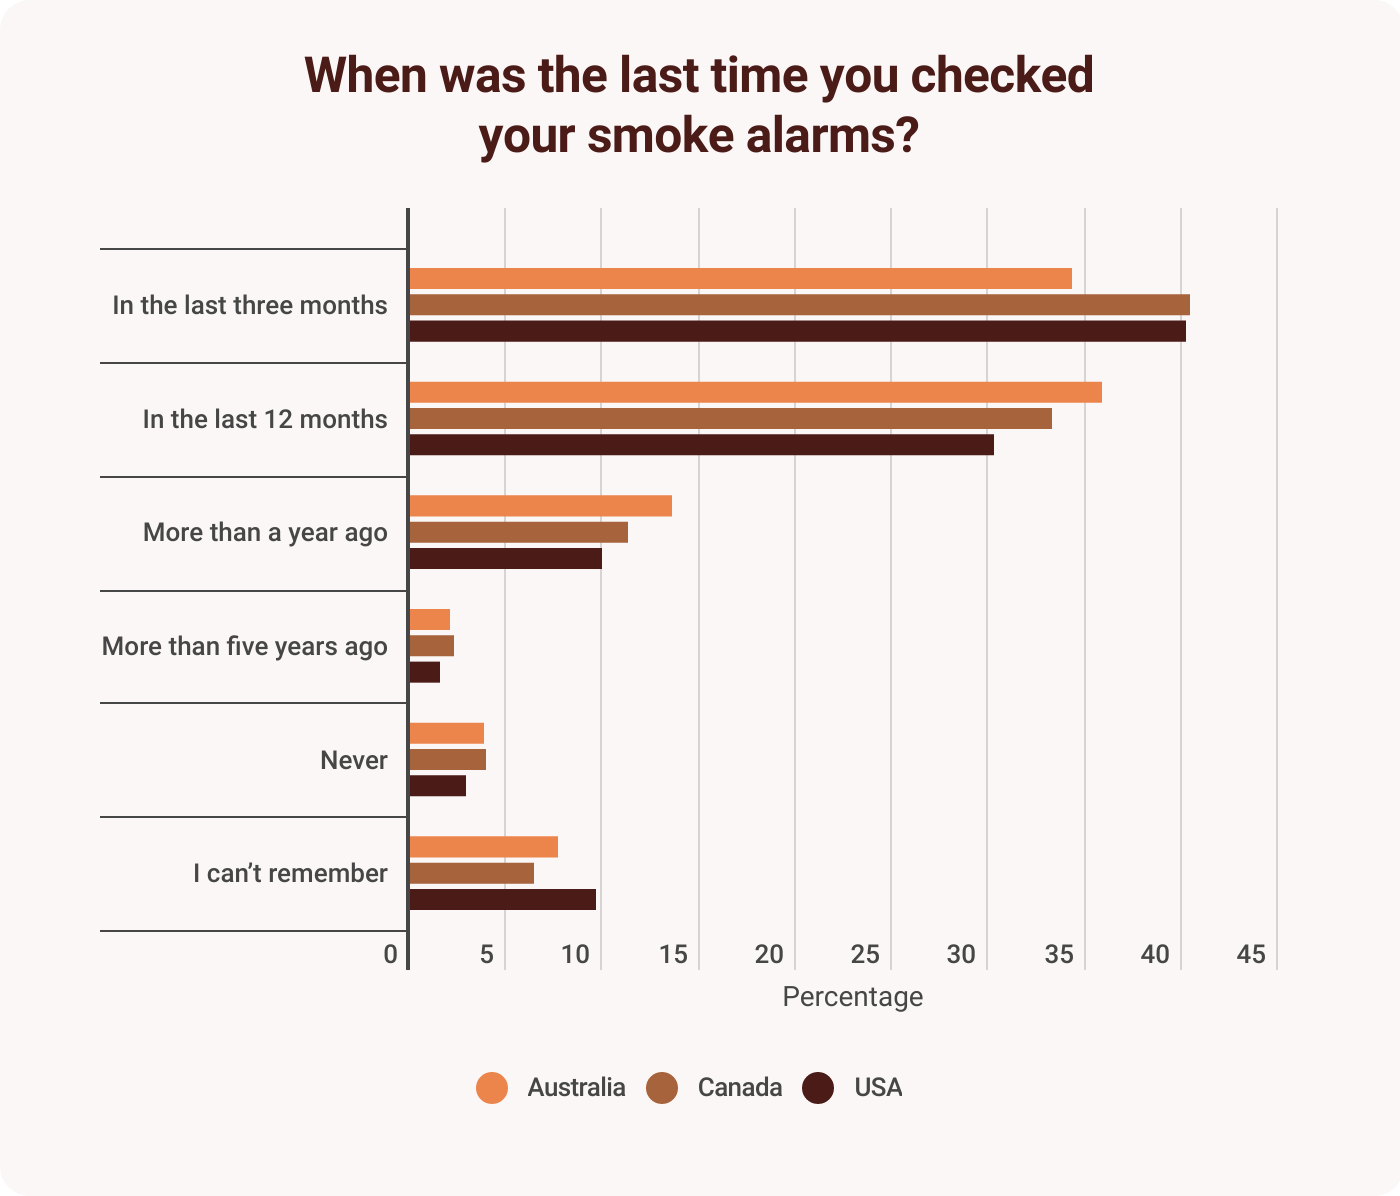 A bar chart on how recently people checked their smoke alarms.